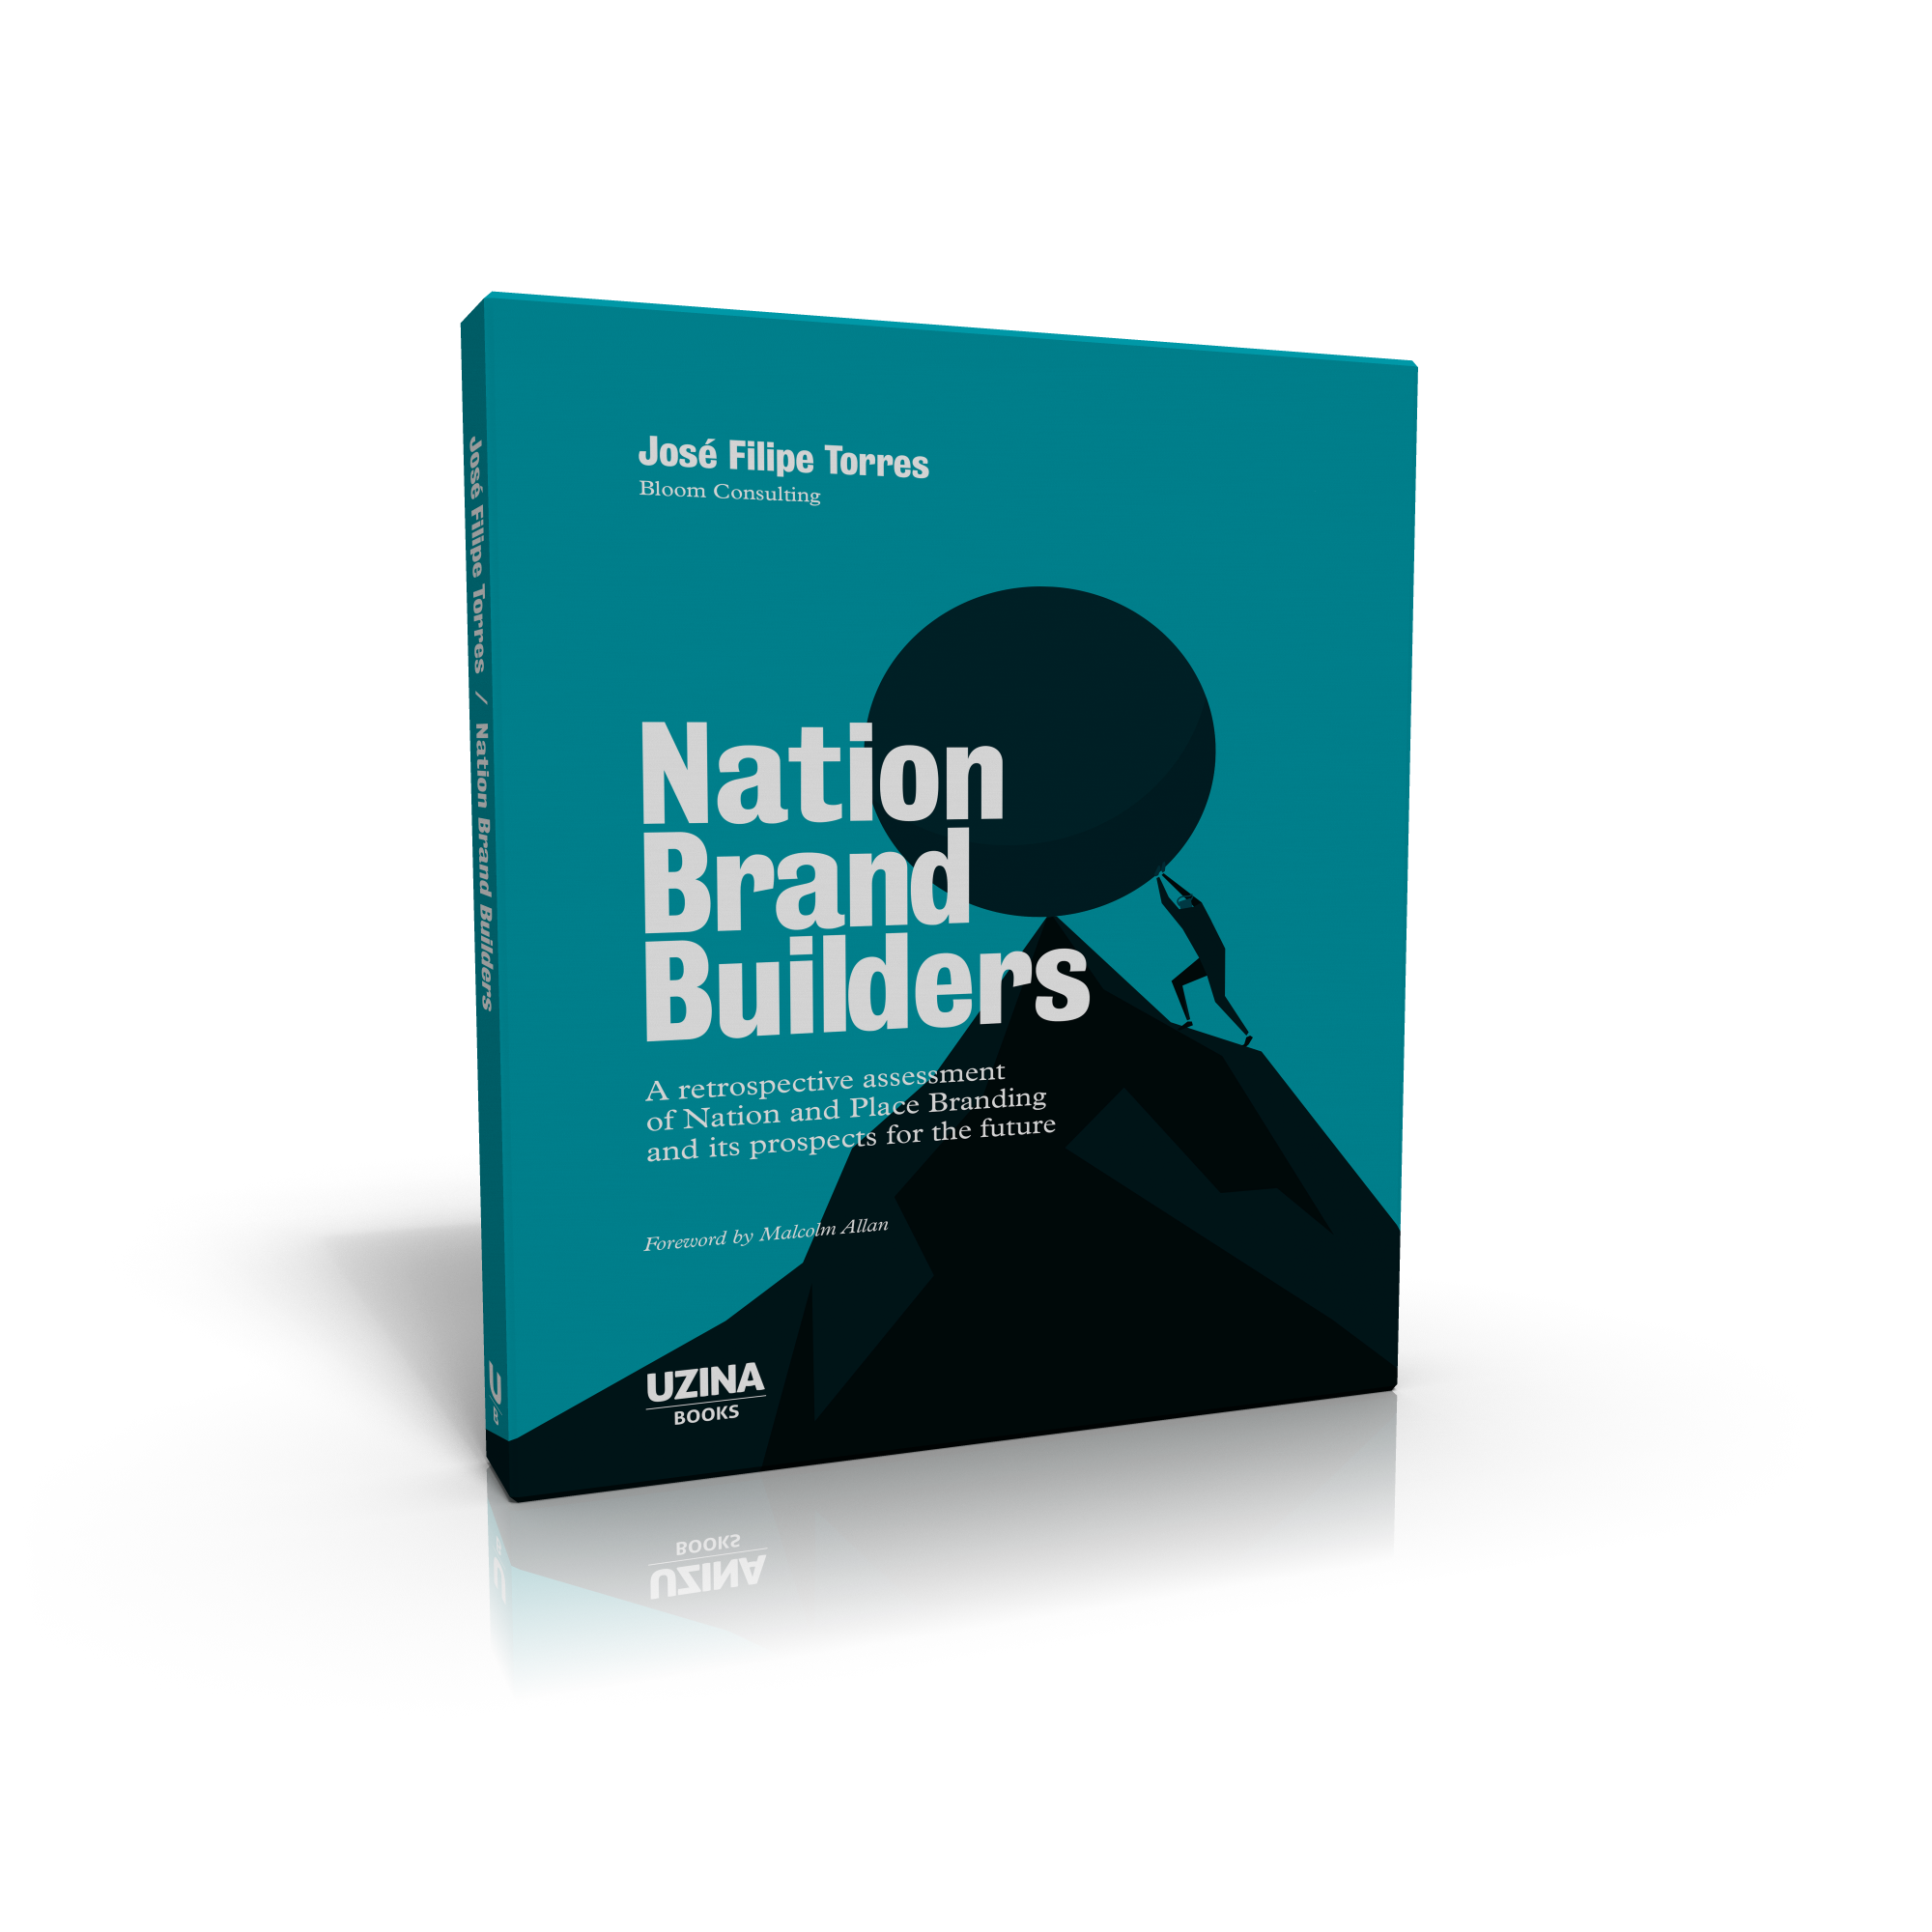 Nation Brand Builders